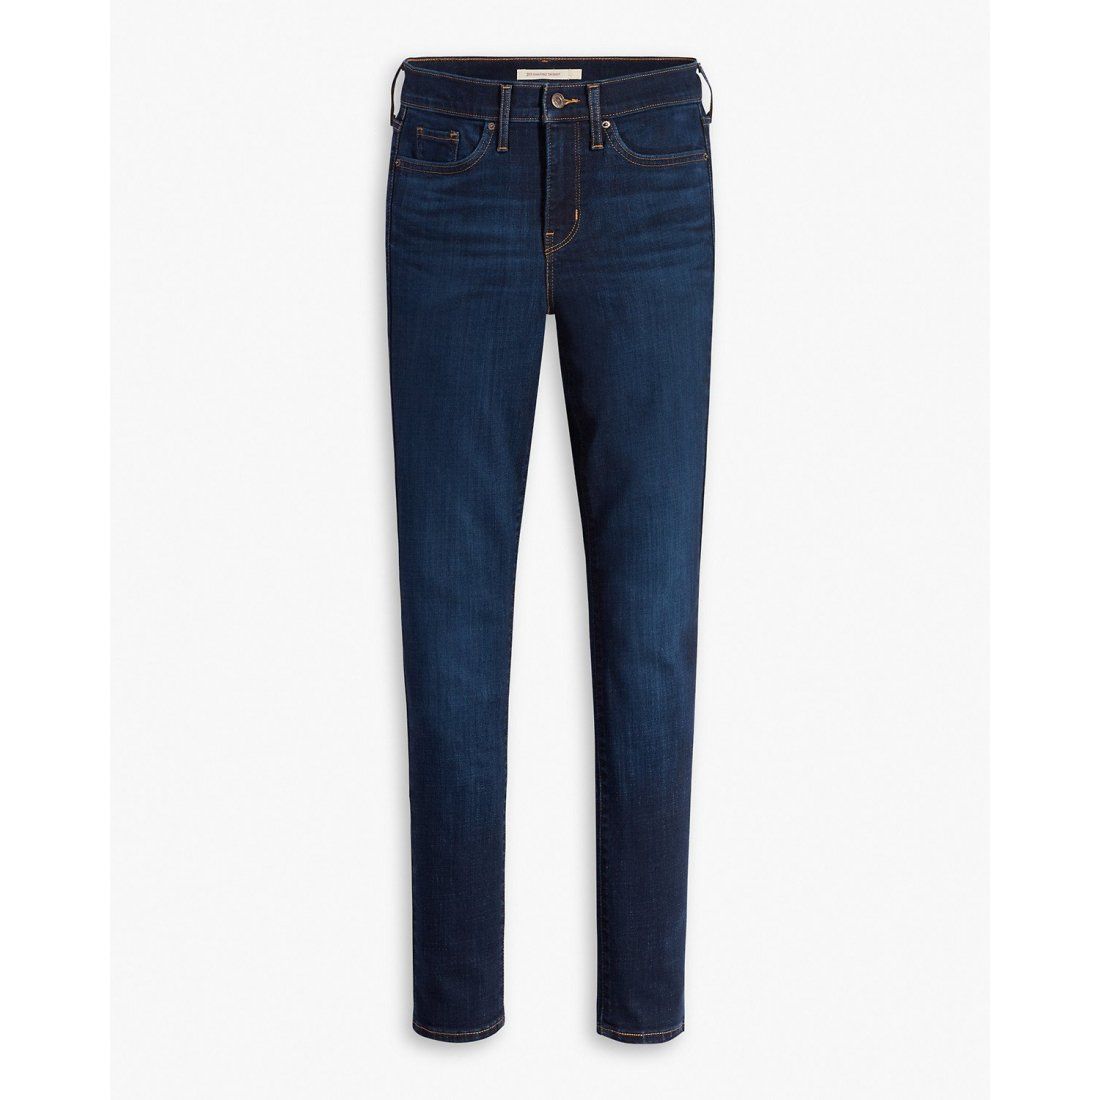 Levi's - Jeans skinny '311 Shaping' pour Femmes